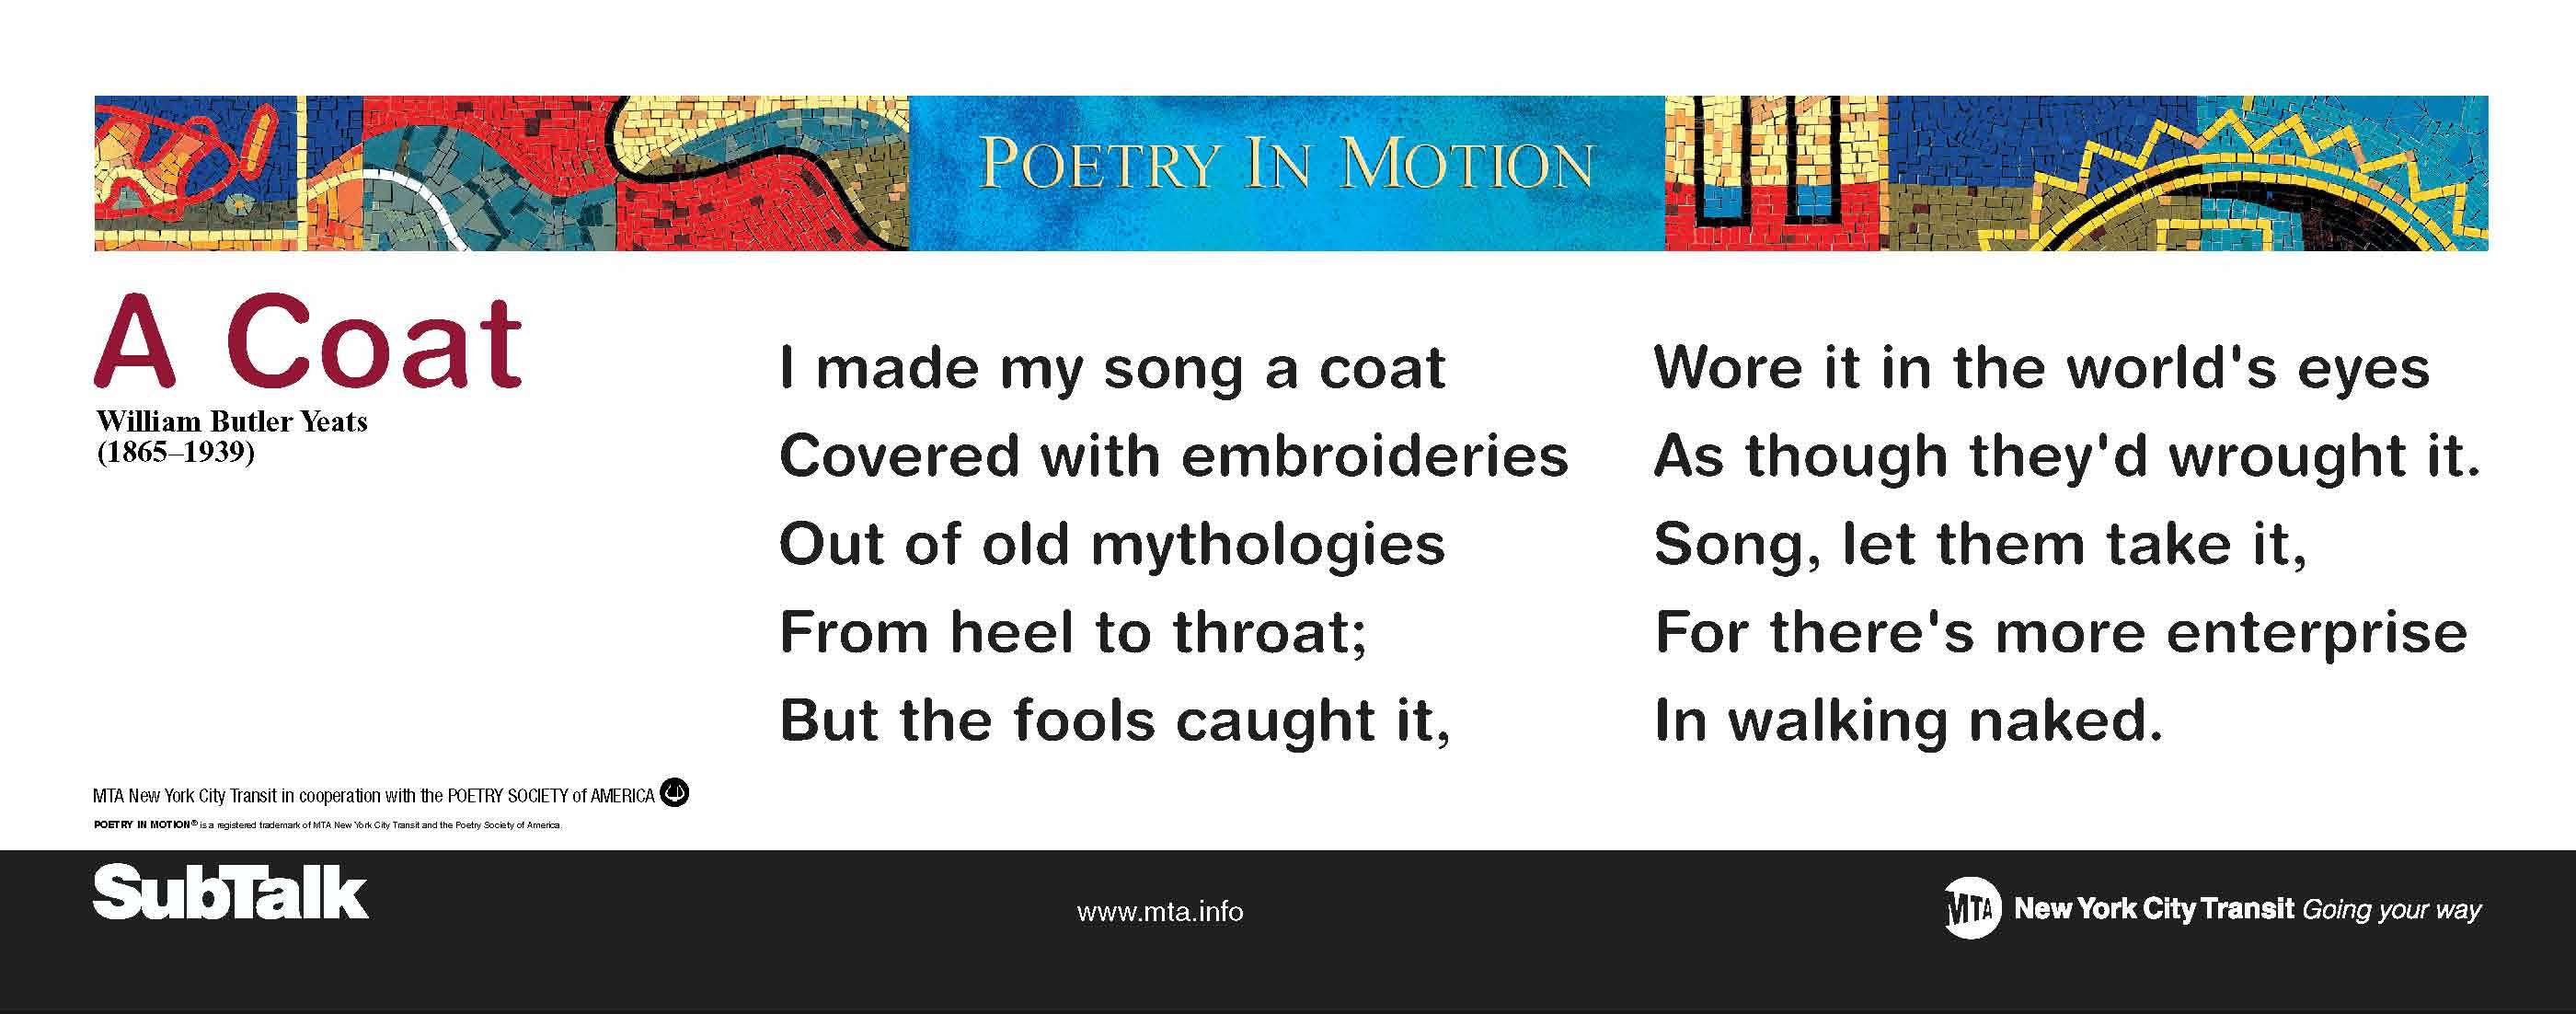 A horizontal poster with a colorful mosaic at the top features a poem titled A Coat, by W.B. Yeats.